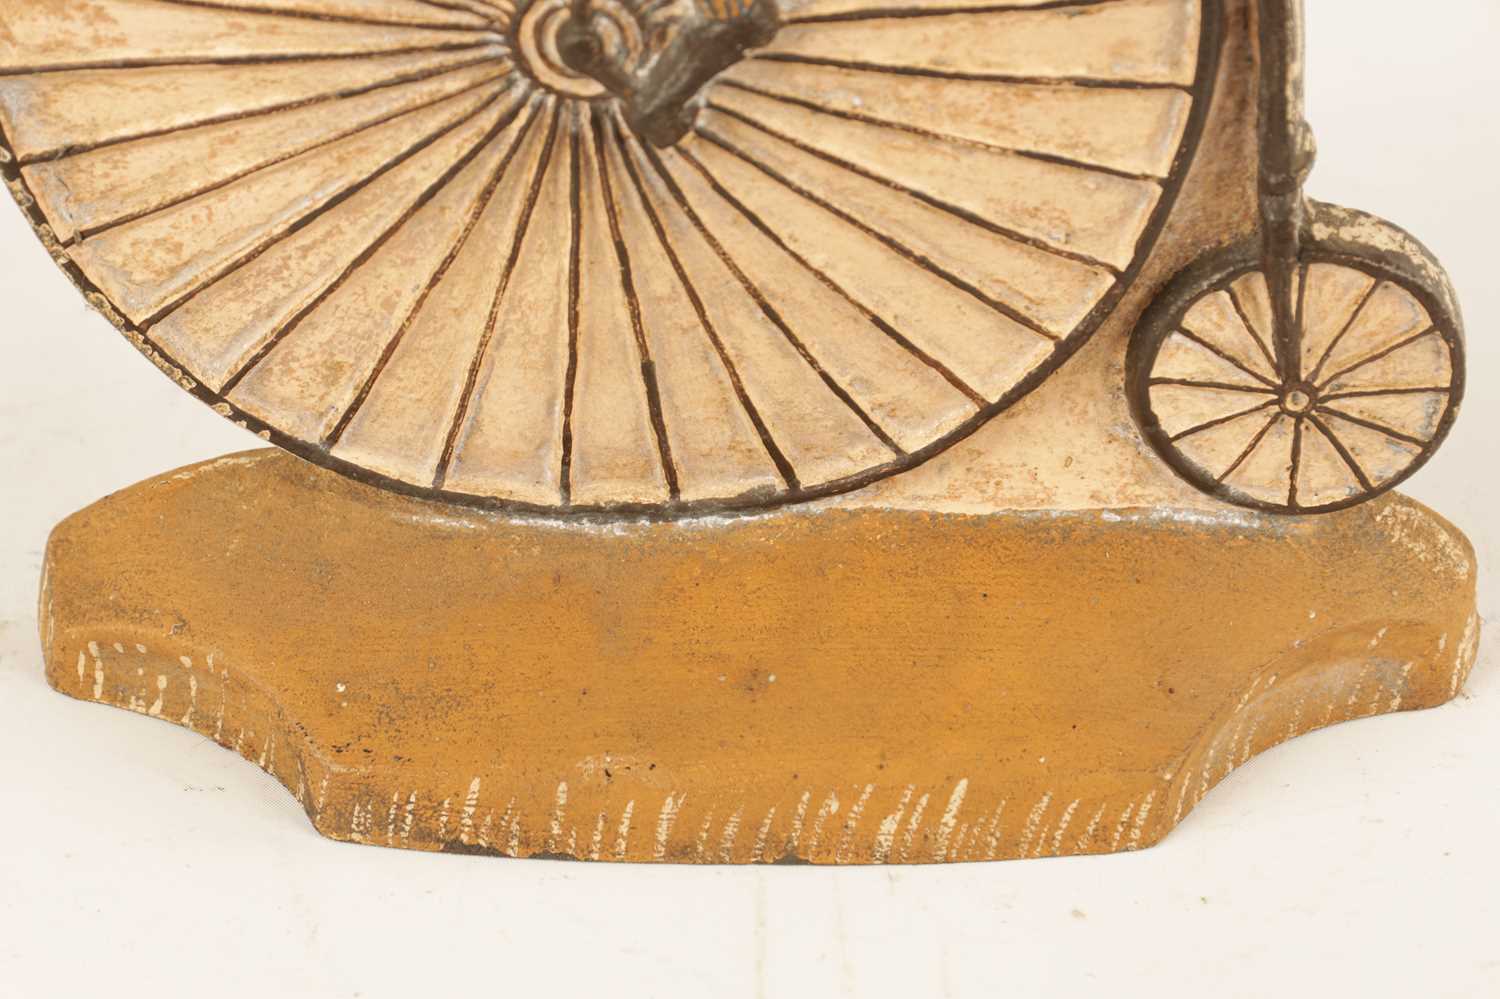 A RARE 19TH CENTURY CAST IRON PAINTED DOORSTOP FORMED AS A CYCLIST MOUNTED ON A PENNY FARTHING - Image 5 of 6